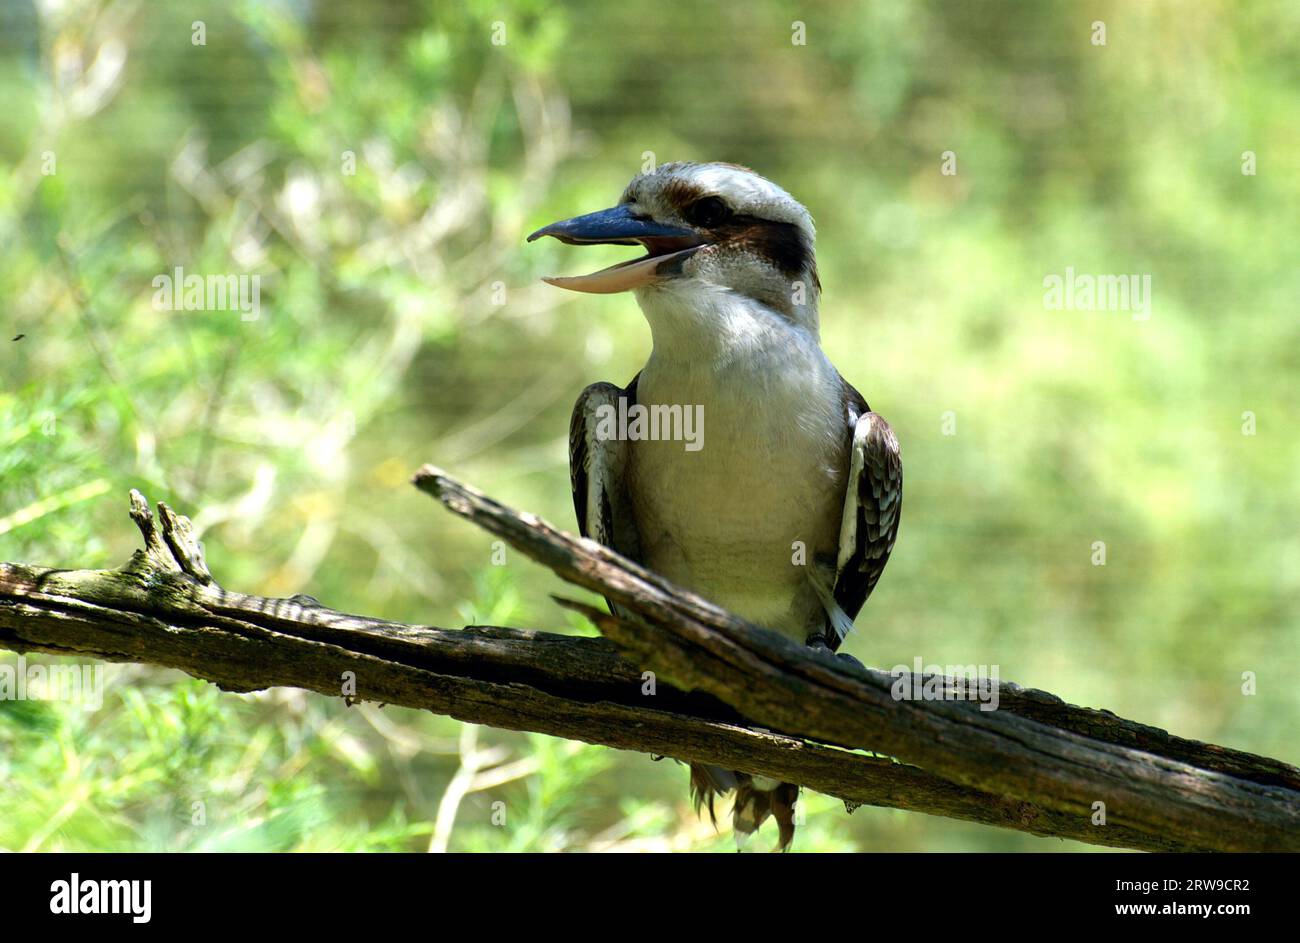 A Kookaburra laughing - at me? The Laughing Kookaburra (Dacelo Gigas) is an Australian icon, its raucous laughter echoing through the bush. Stock Photo